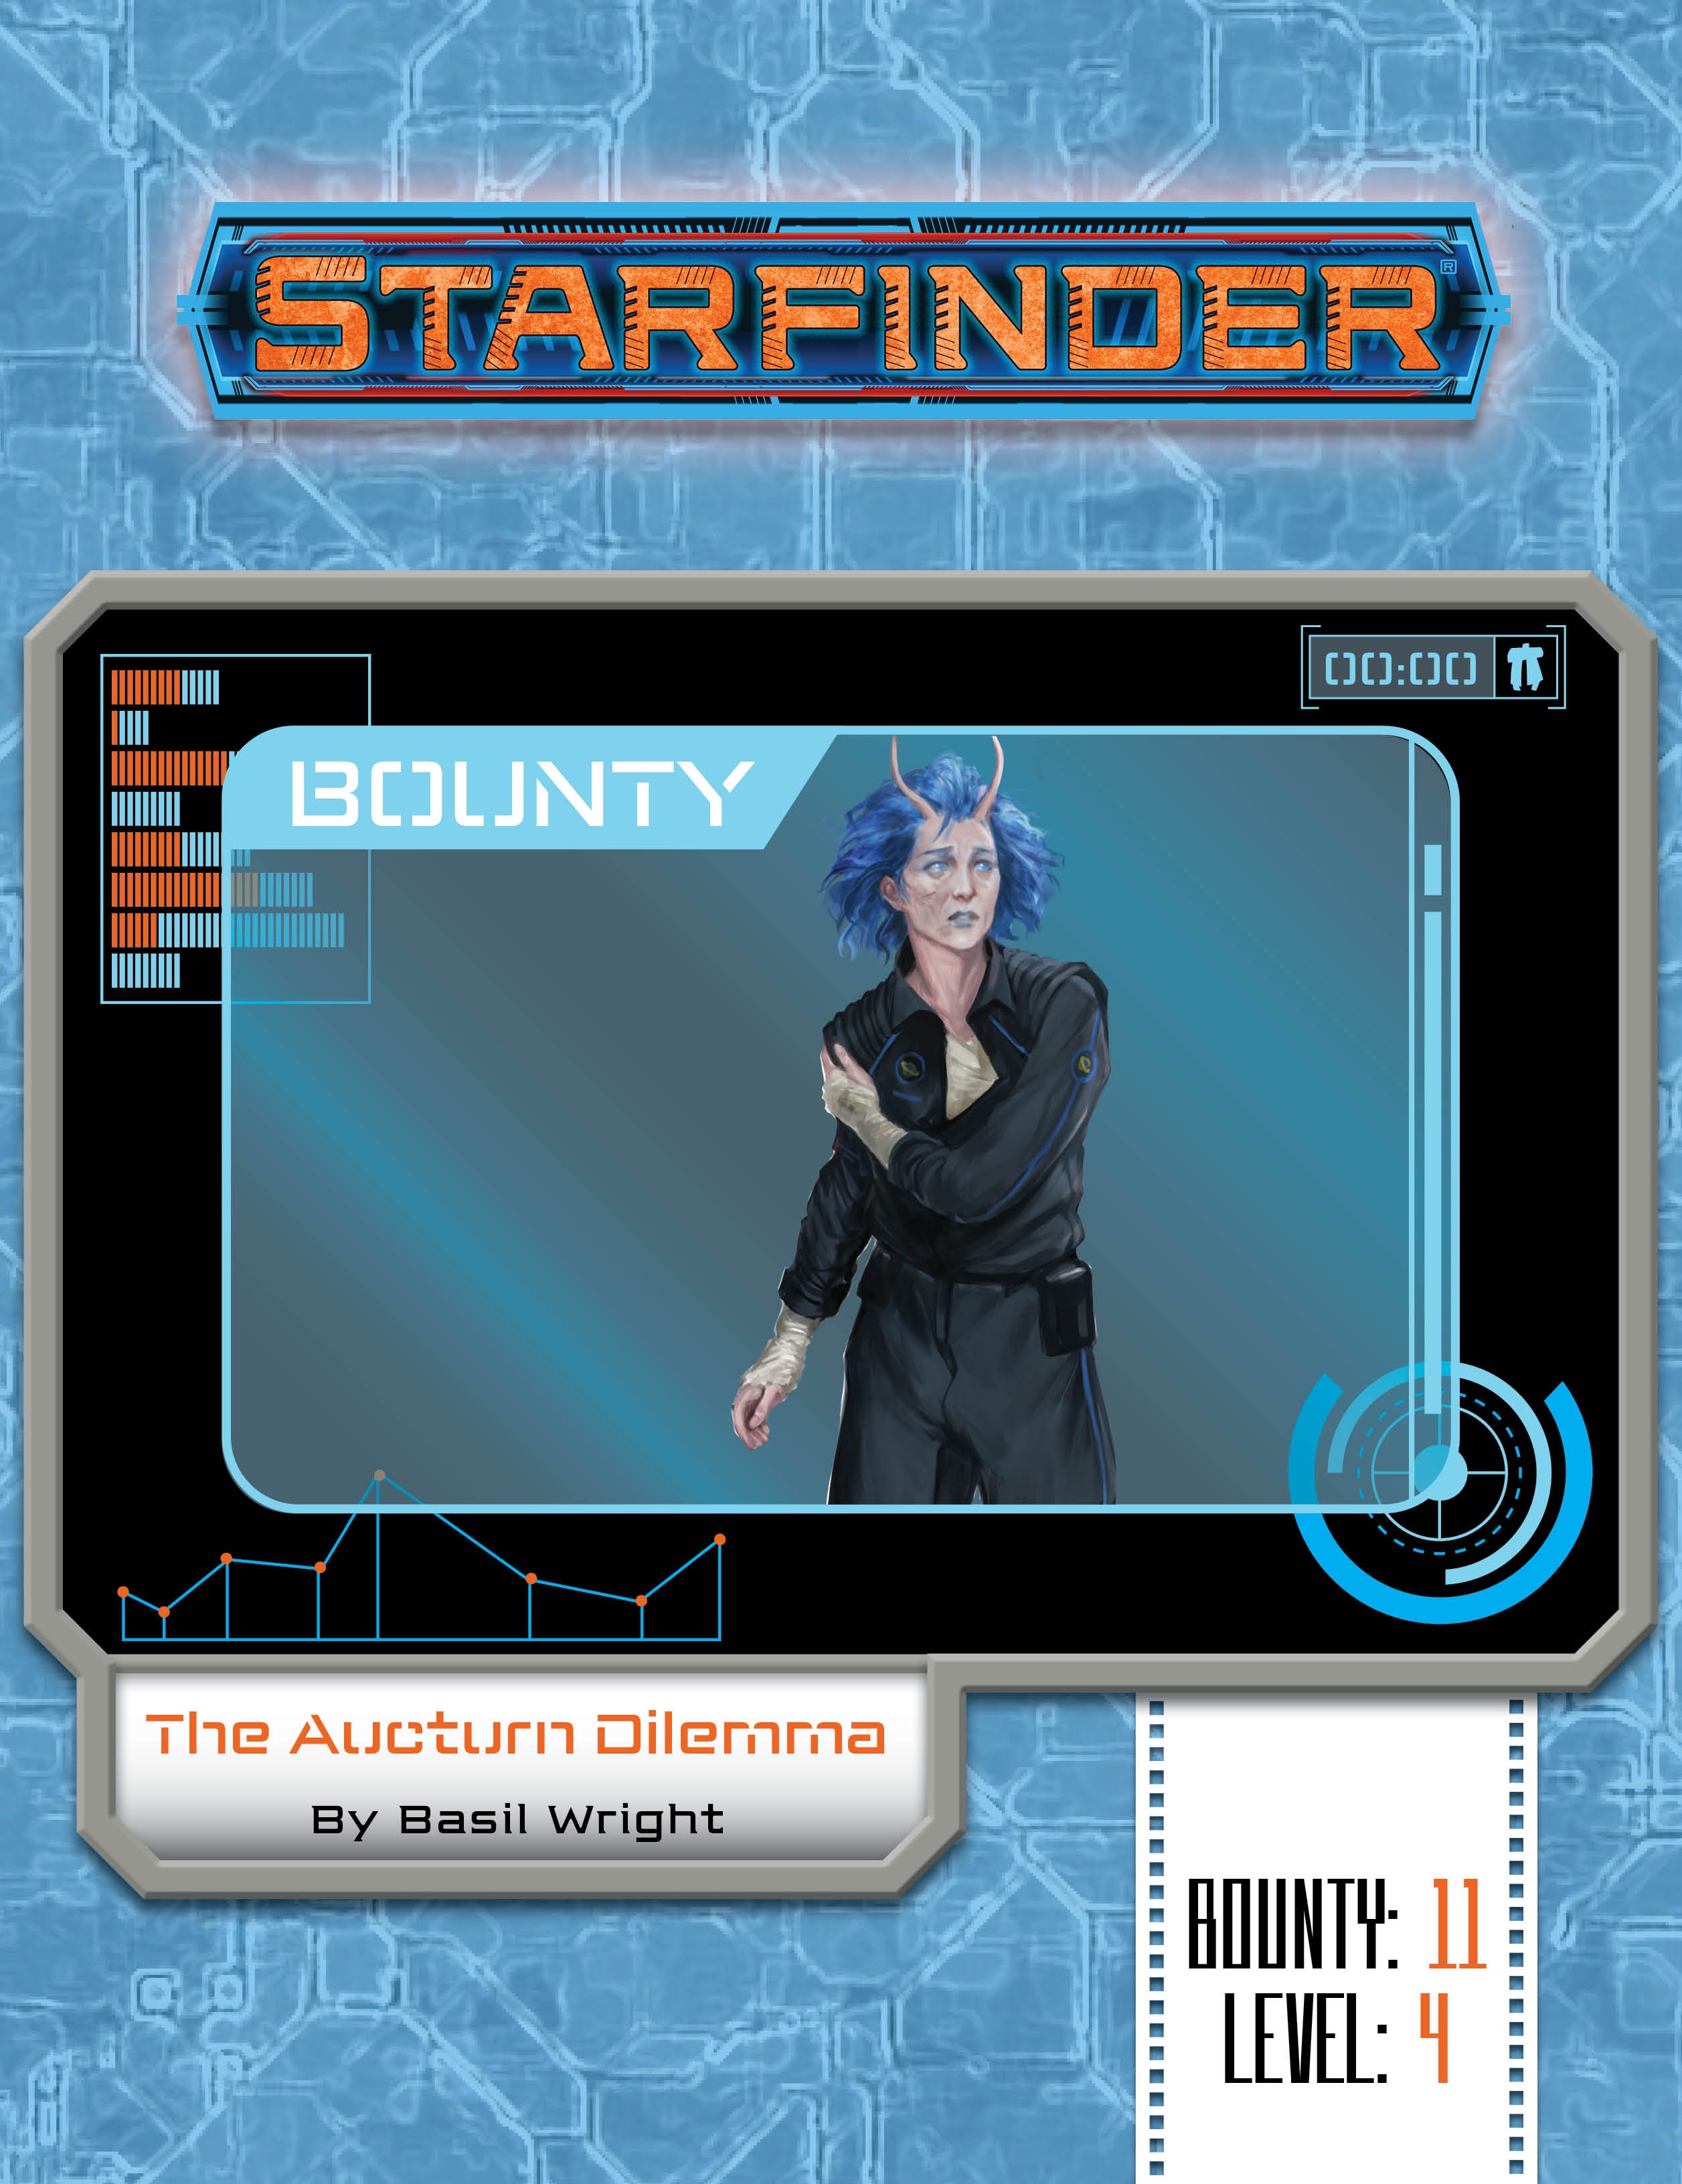 The cover for Starfinder Society Bounty #11: The Aucturn Dilemma